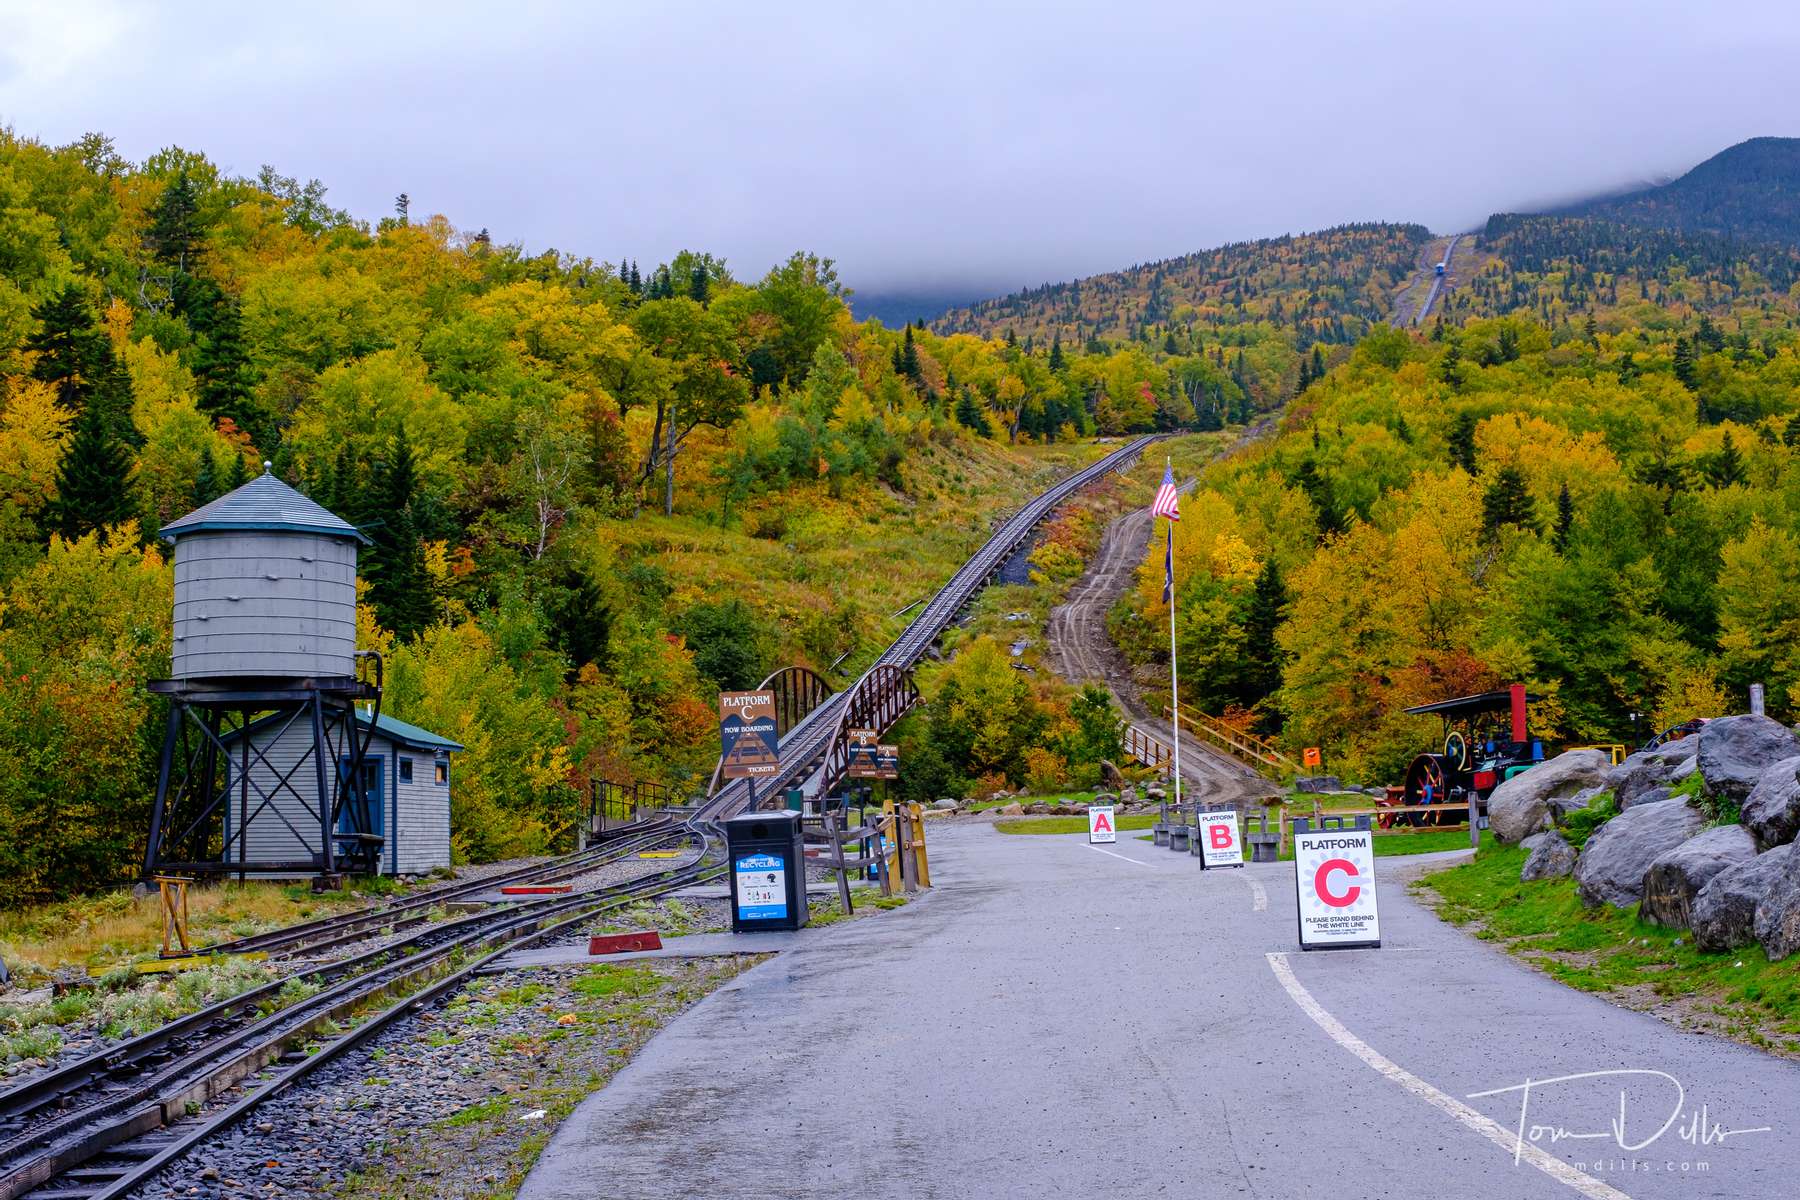 Boarding area for the Mount Washington Cog Railway in New Hampshire